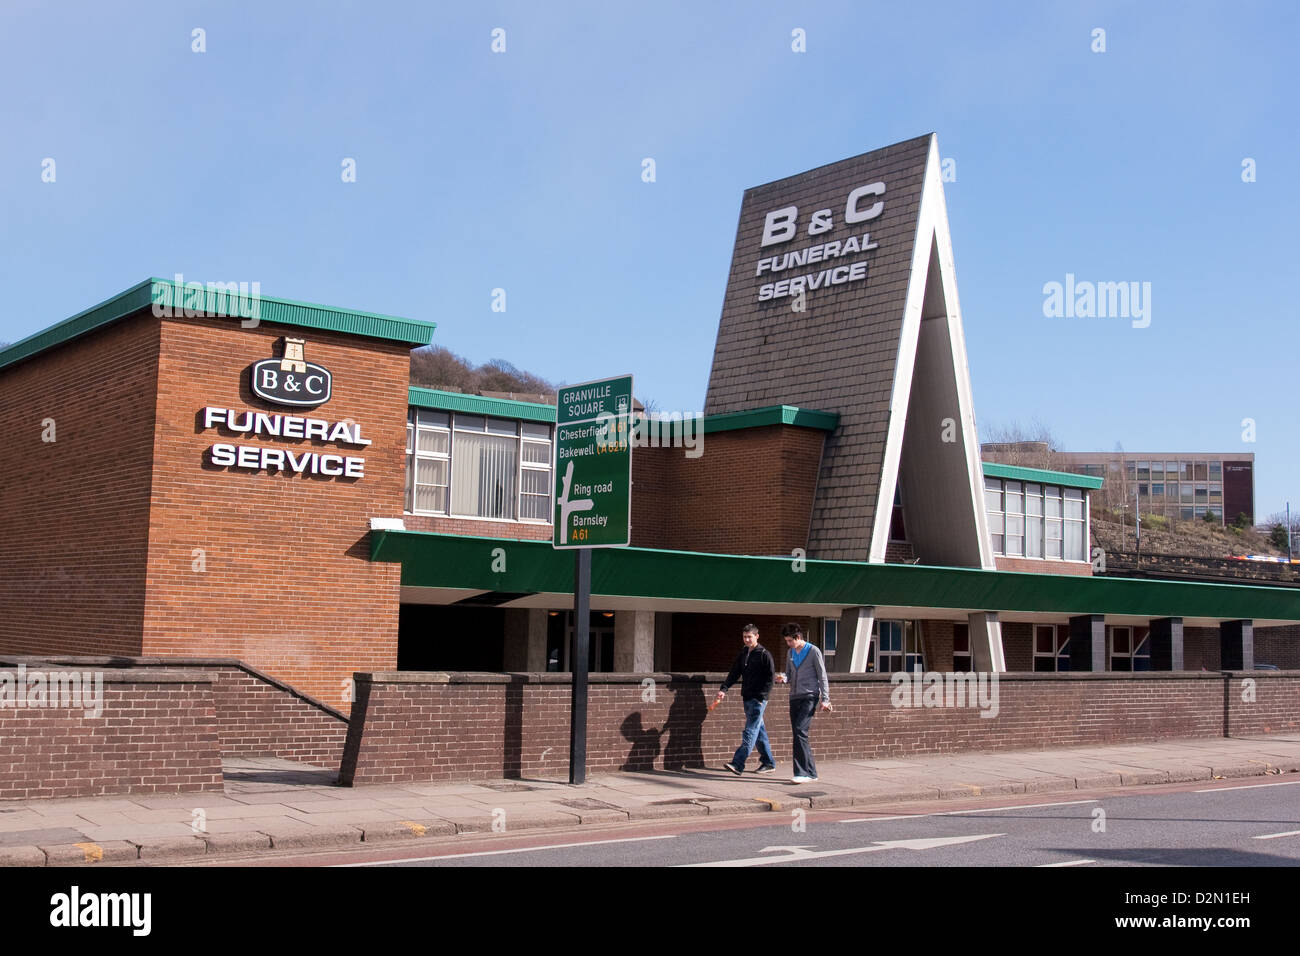 B & C Funeral Service building in Sheffield South Yorkshire England UK Stock Photo